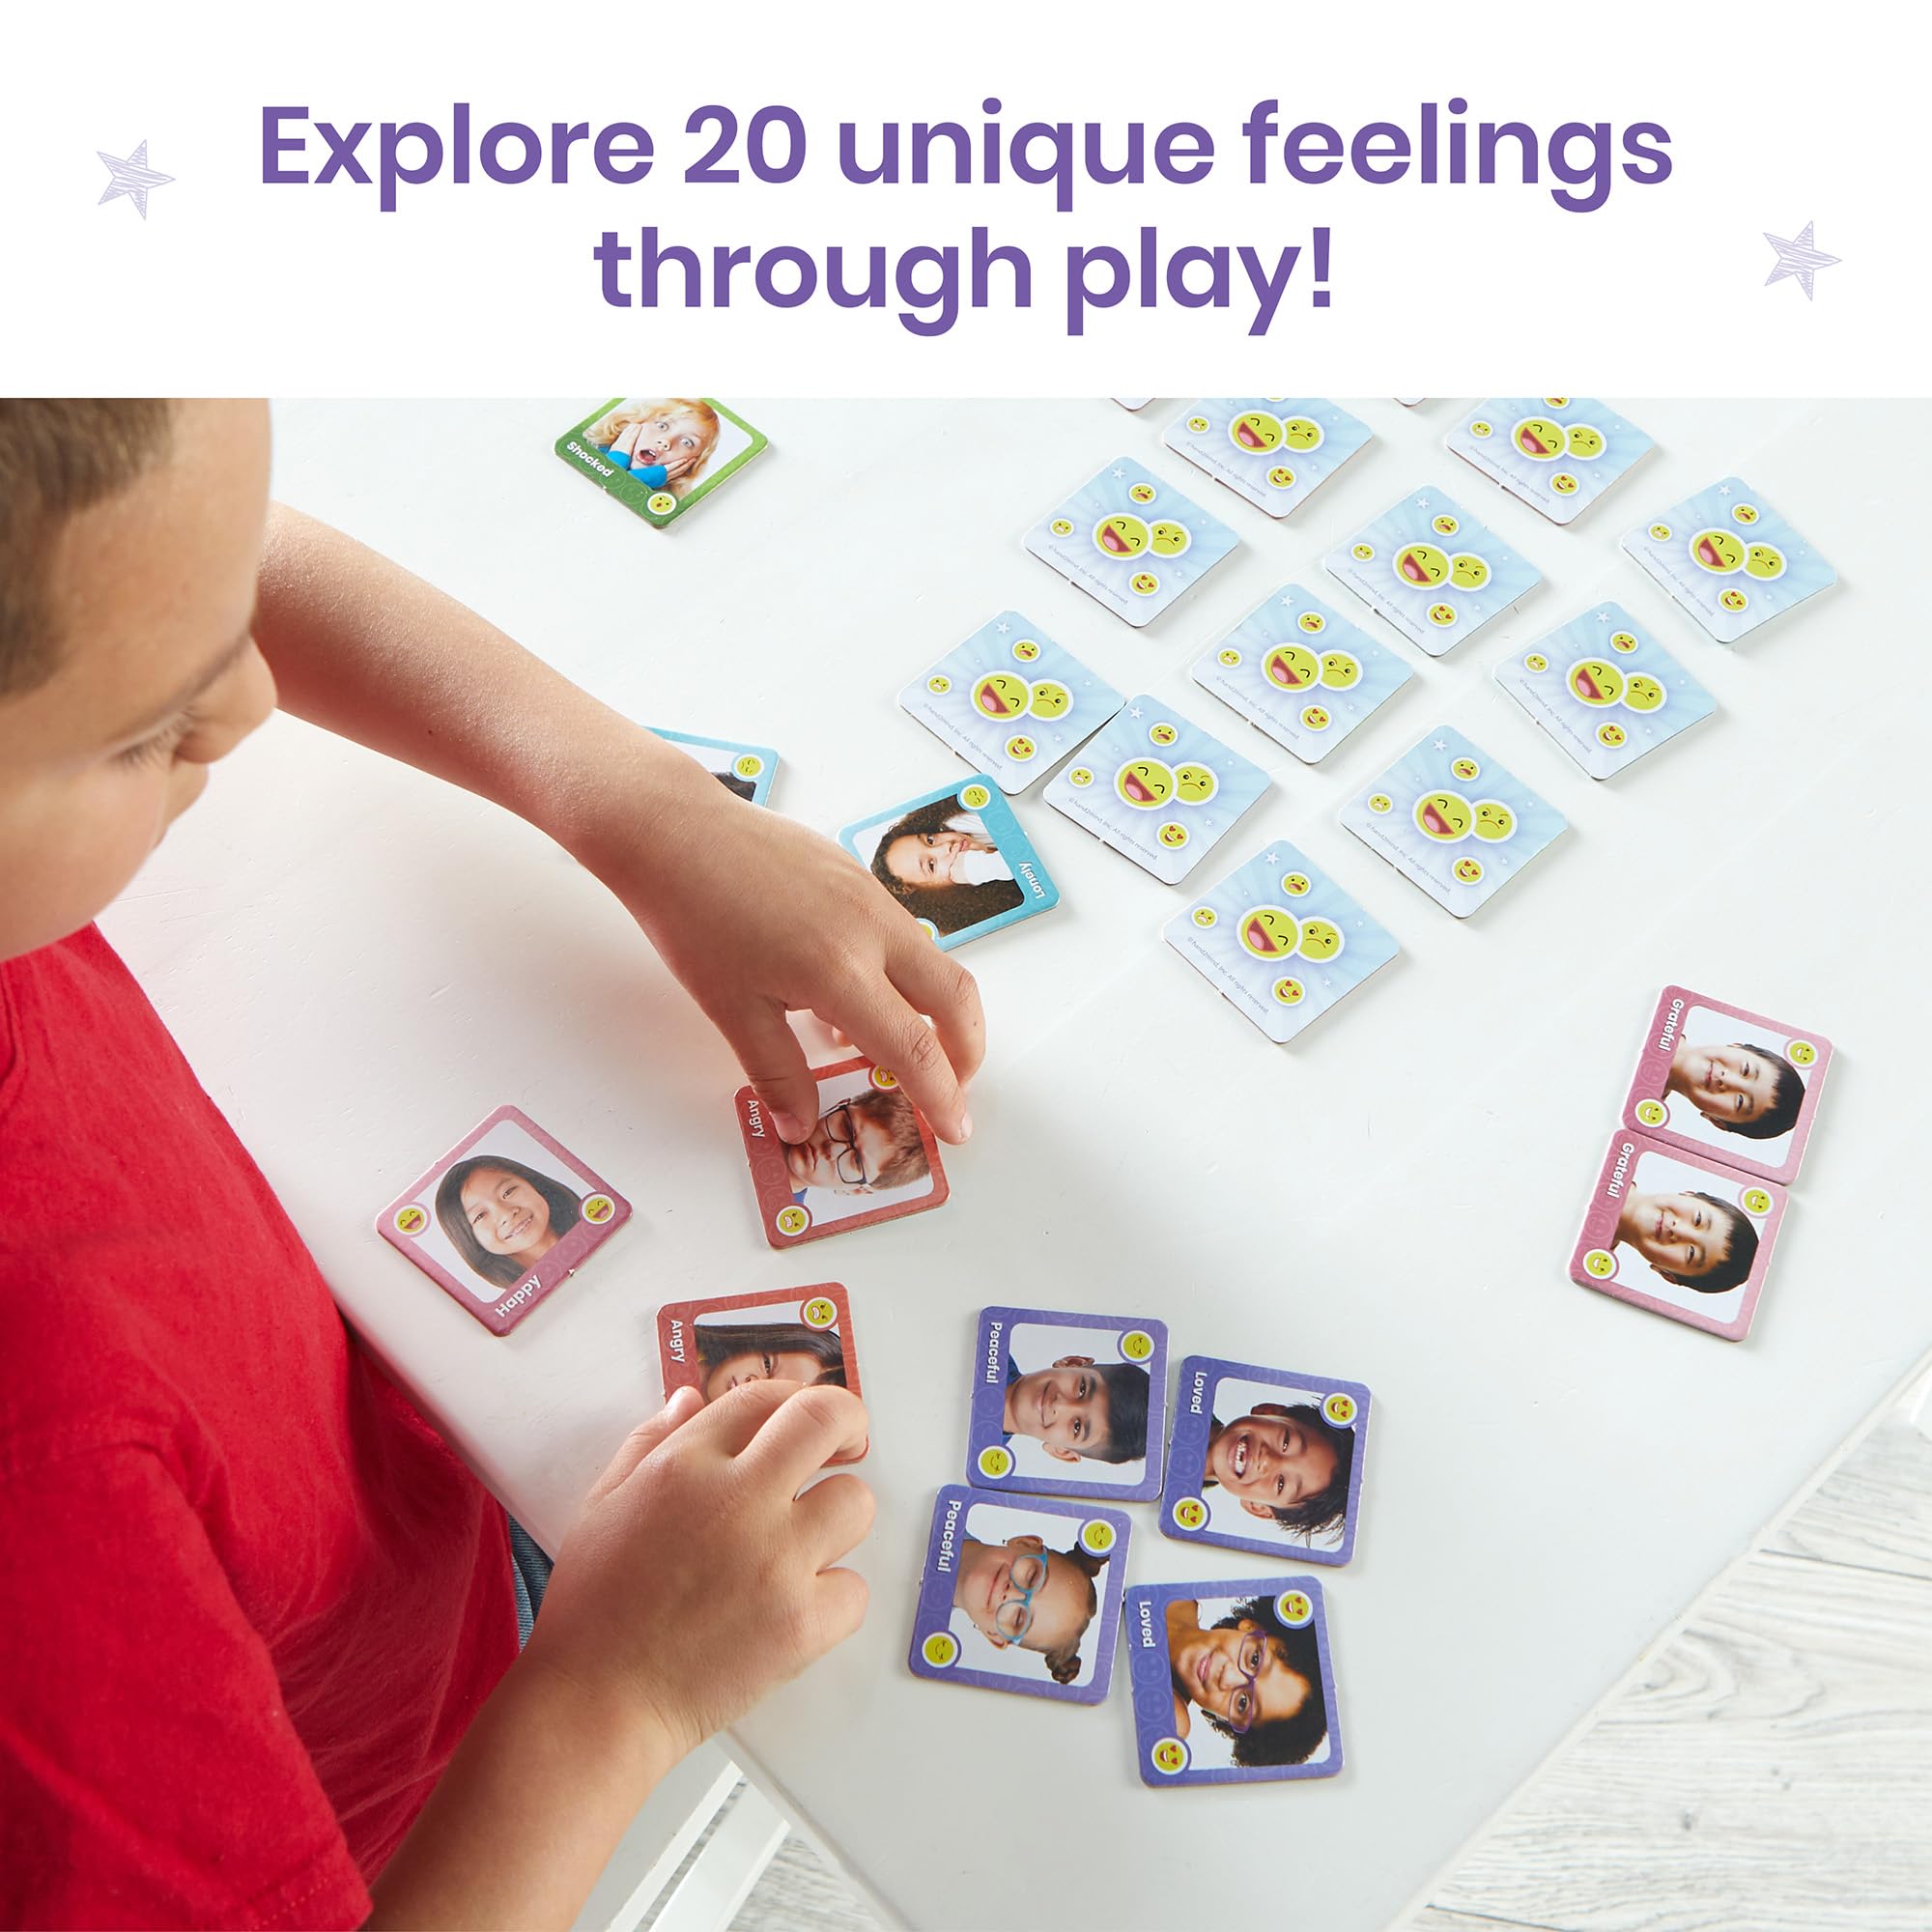 hand2mind Express Your Feelings Memory Match Game, Emotion Cards for Kids, Matching Card Game, Social Emotional Learning Activities, Play Therapy Games for Kids, Mindfulness for Kids, Calm Down Corner